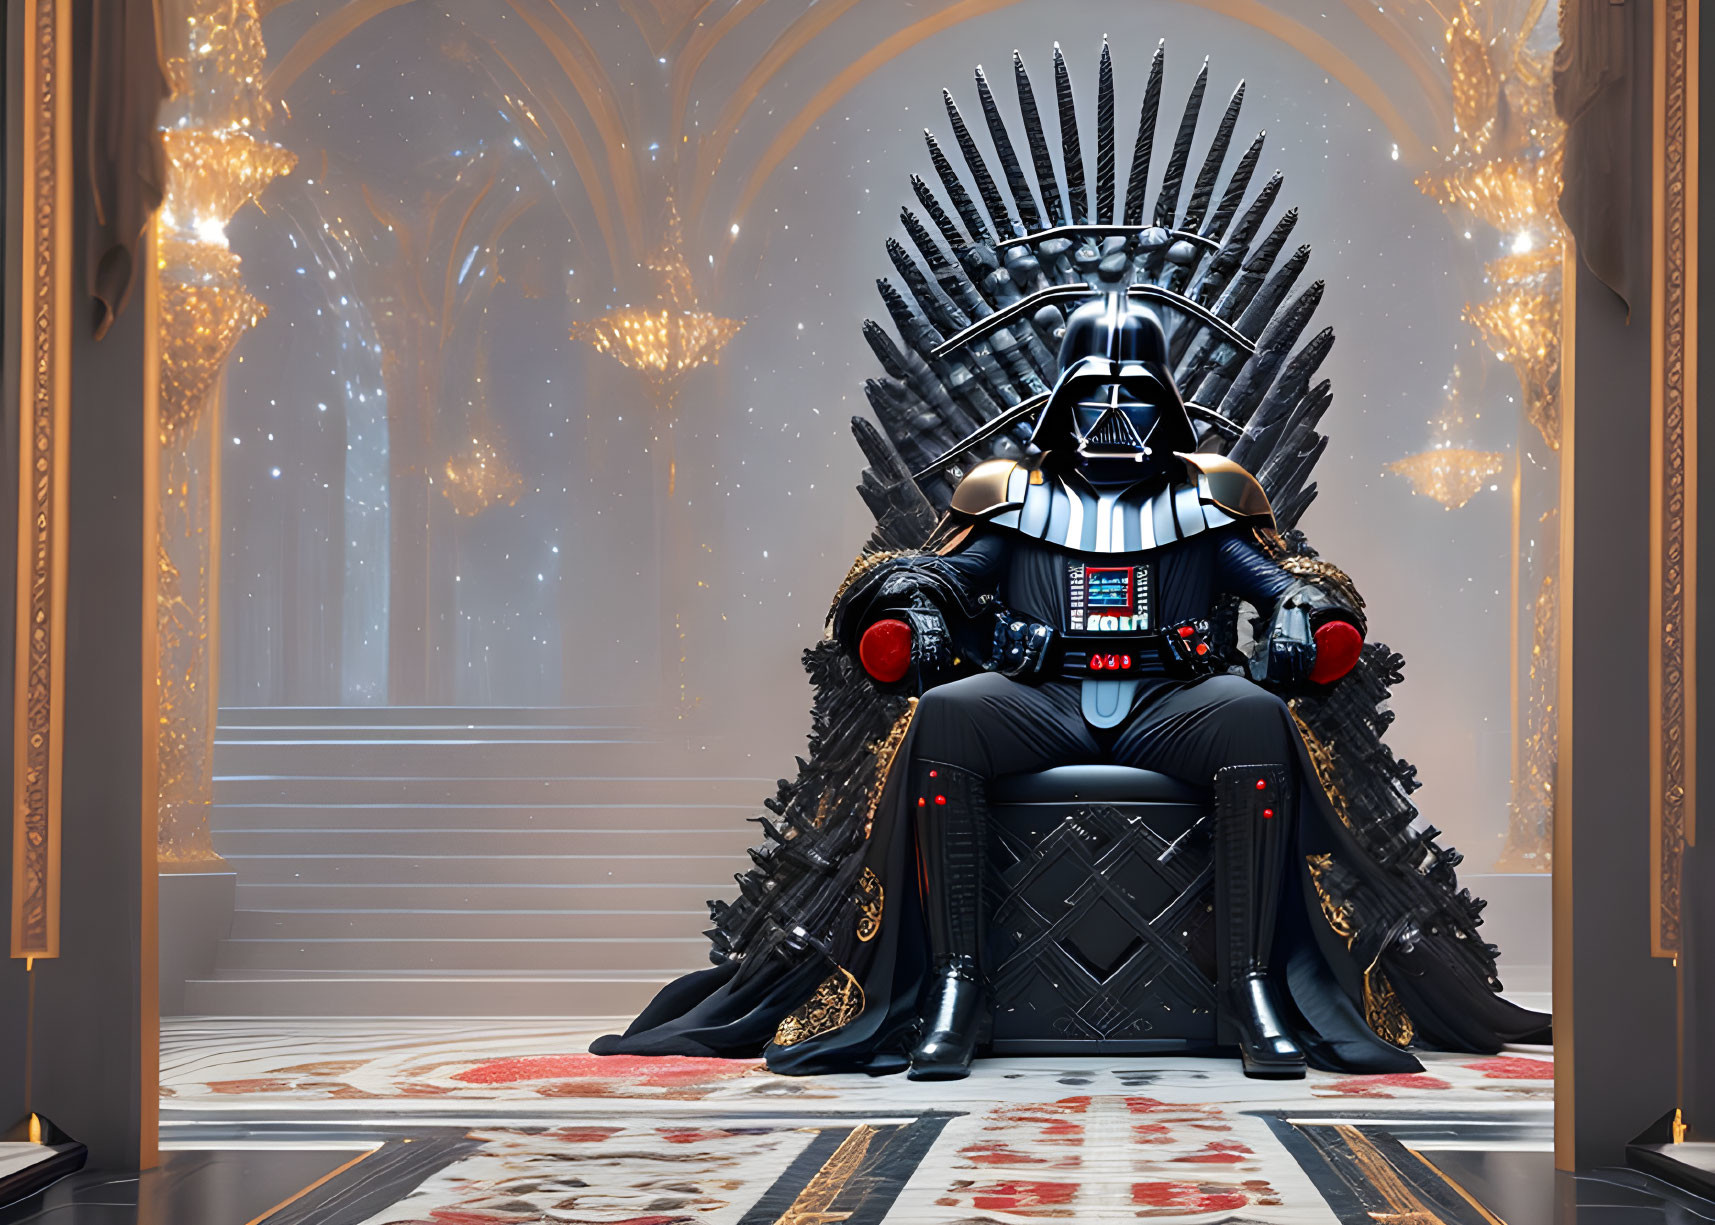 Person in Darth Vader costume on Iron Throne-like chair in grand room